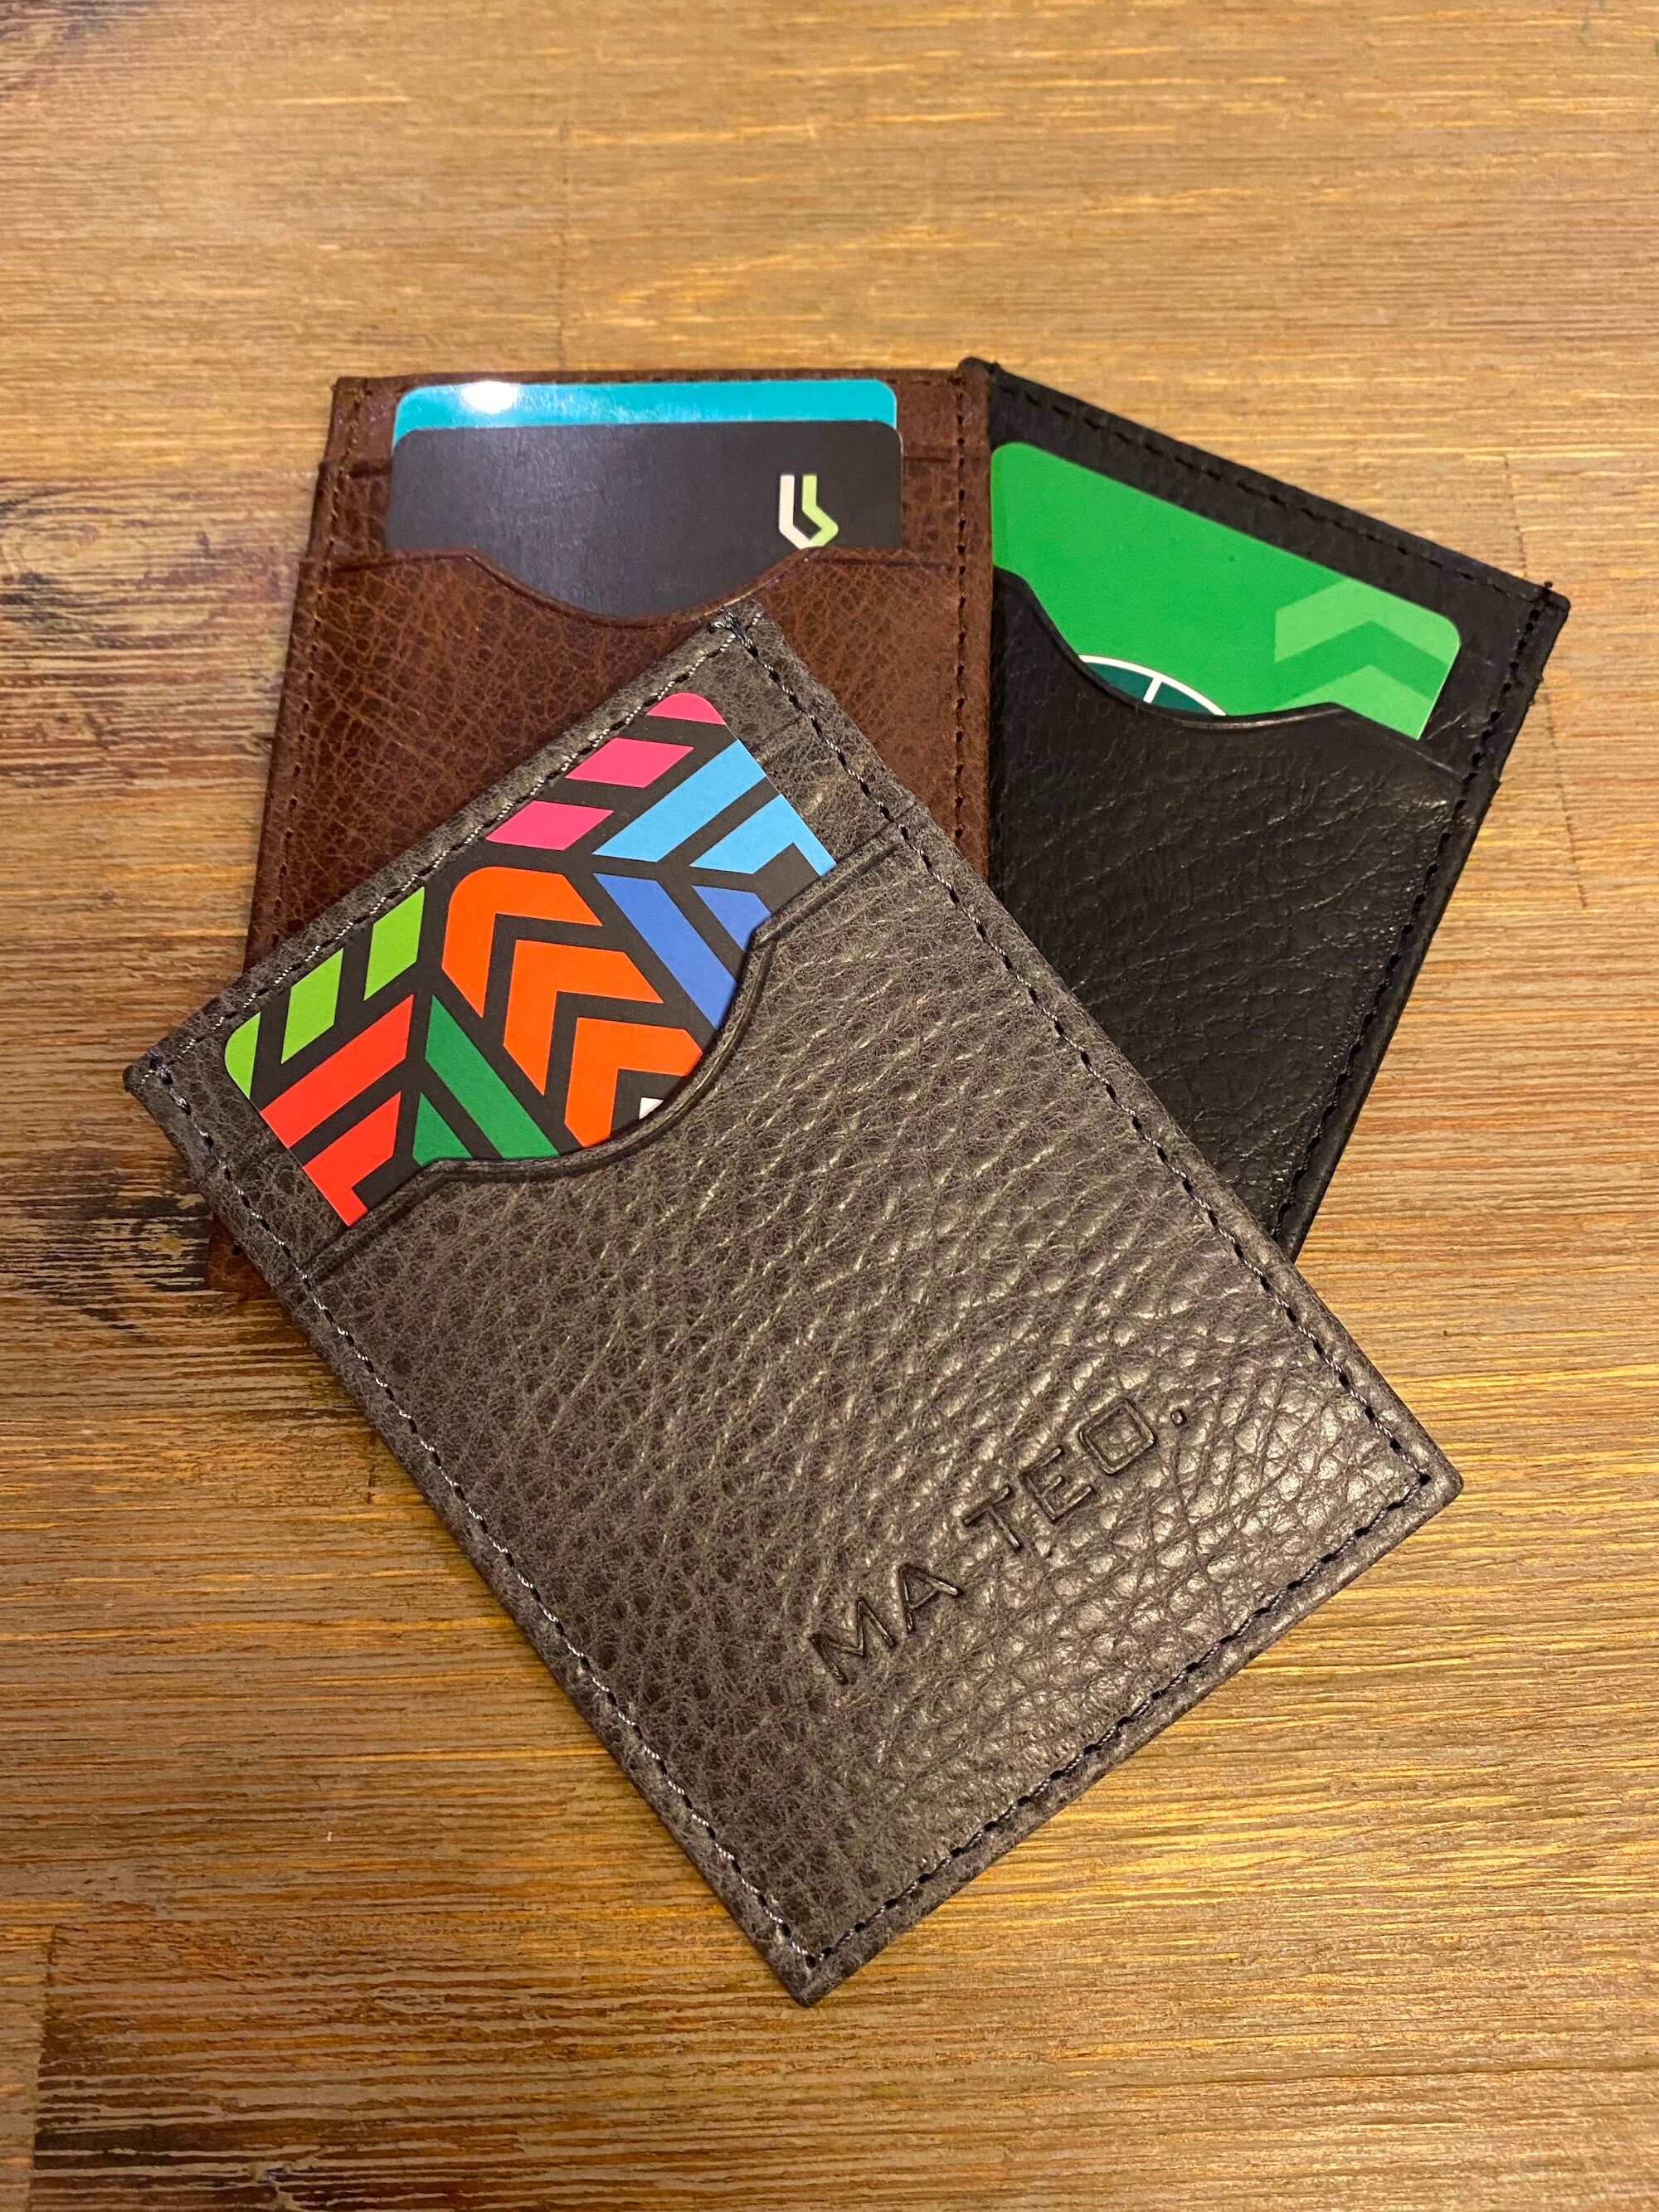 Minimalist Wallet, Fathers Day Gift, Front Pocket Wallet, Leather Card Holder, Credit Card Holder, Slim Leather Wallet, EPI Wallet, Green